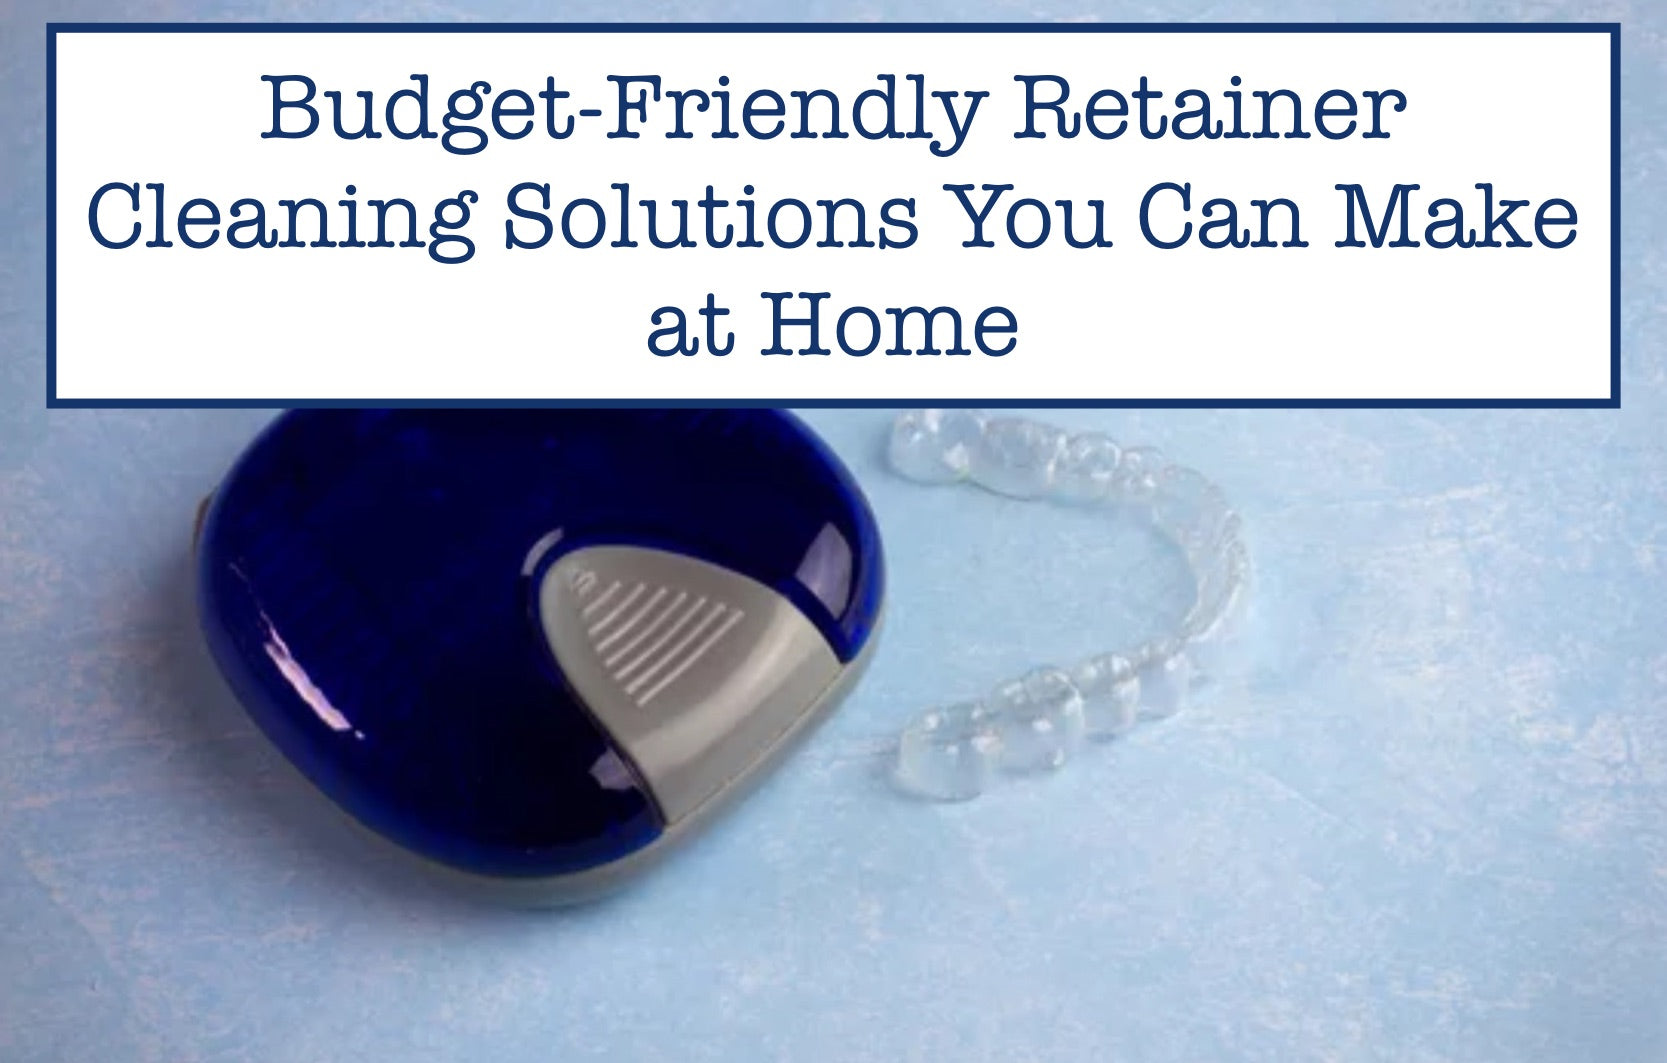 Budget-Friendly Retainer Cleaning Solutions You Can Make at Home